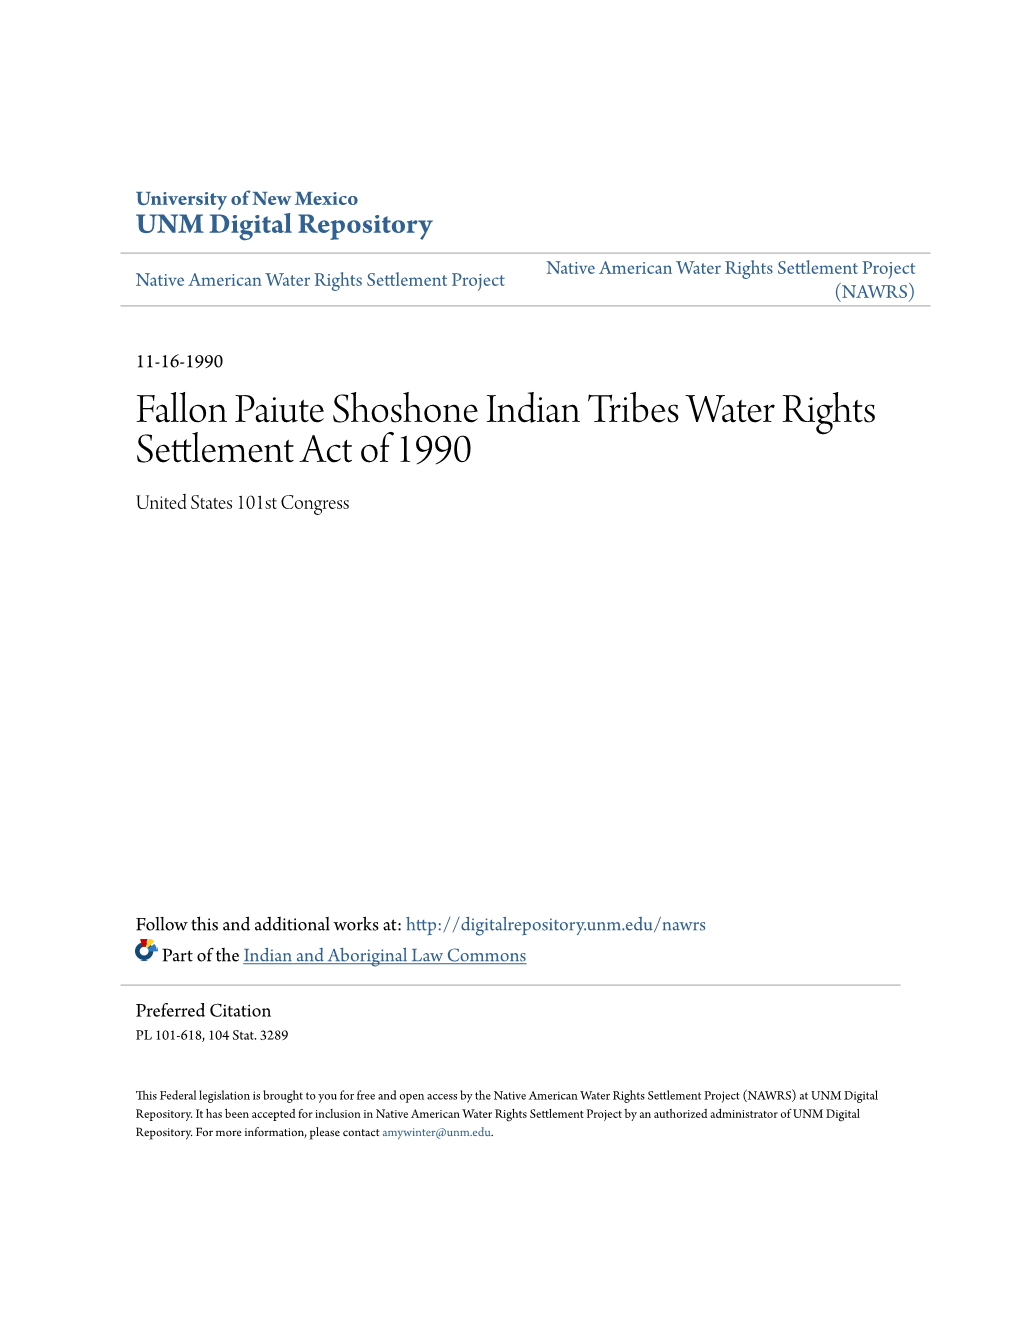 Fallon Paiute Shoshone Indian Tribes Water Rights Settlement Act of 1990 United States 101St Congress